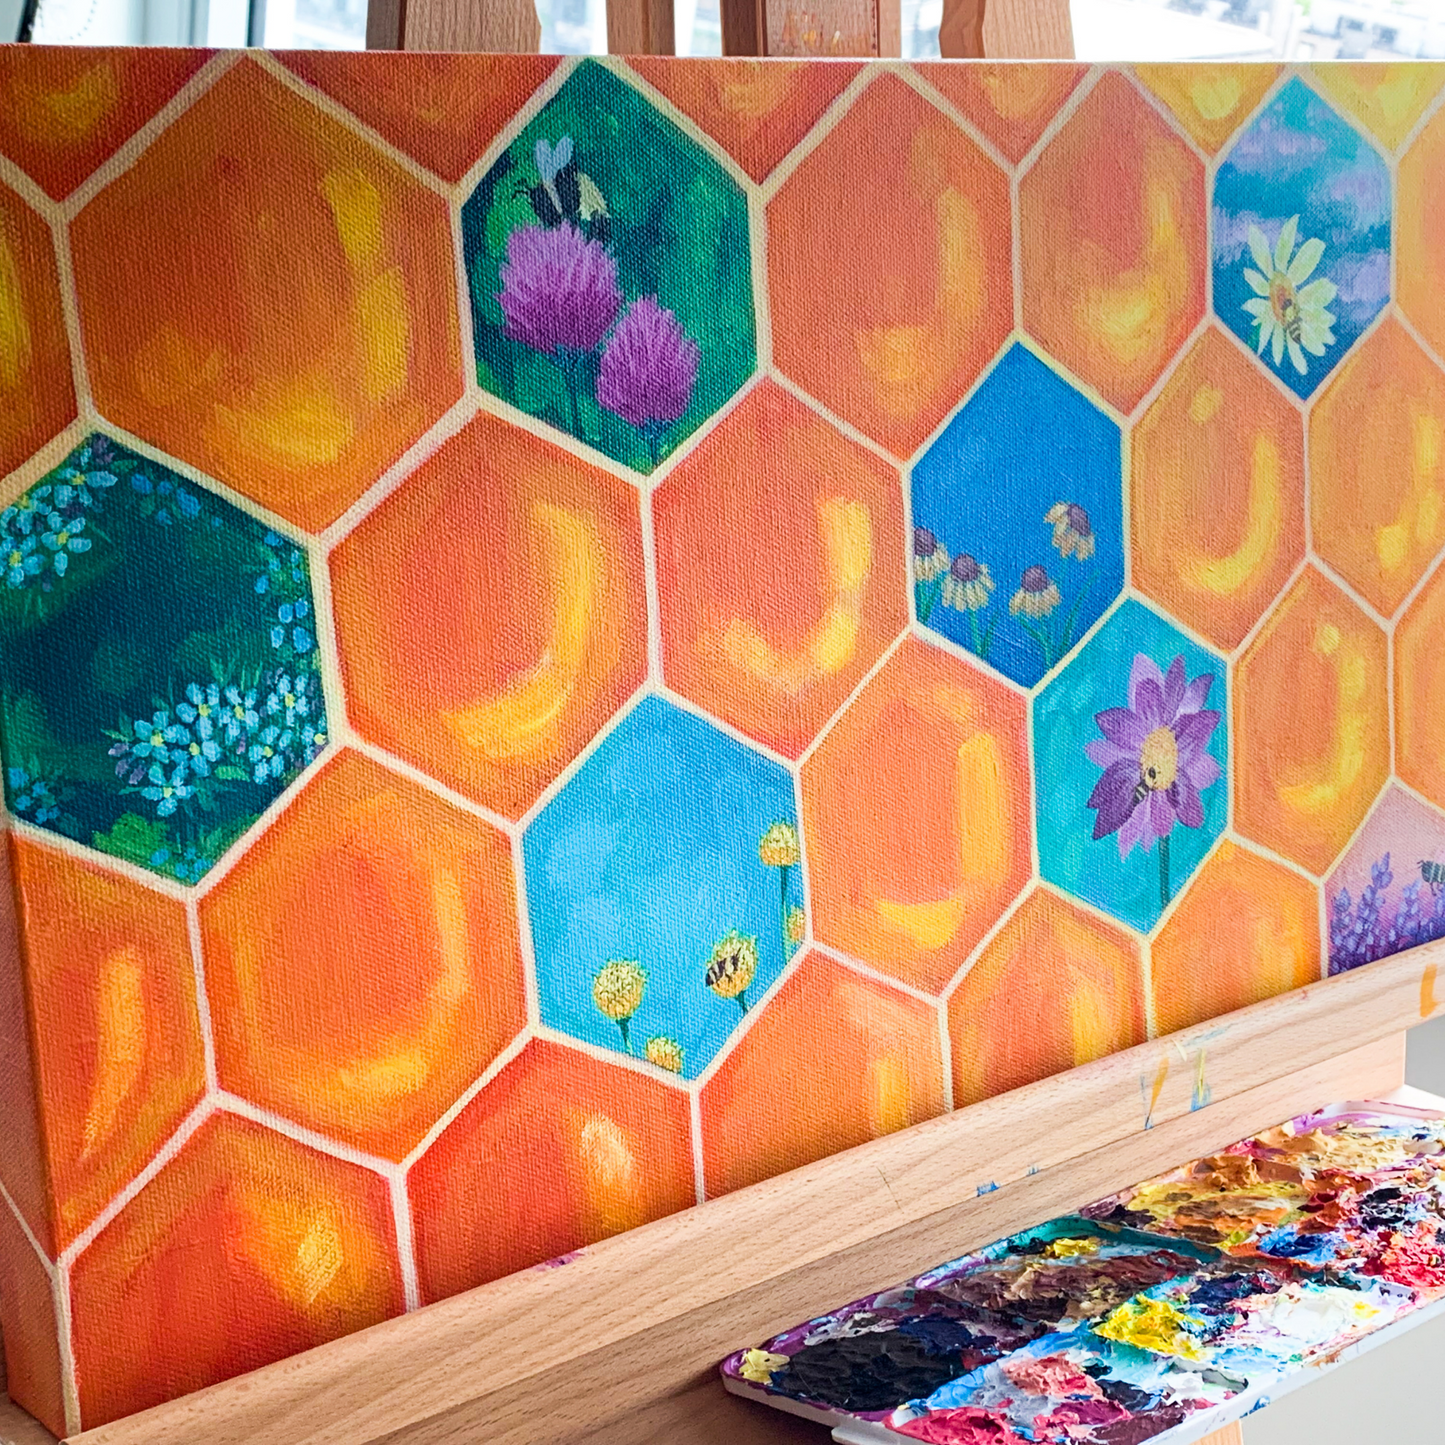 An easel with an orange honeycomb painting wiht some honeycombs having different colours and flowers and bees painted in them. Under the easel is a paint palette.